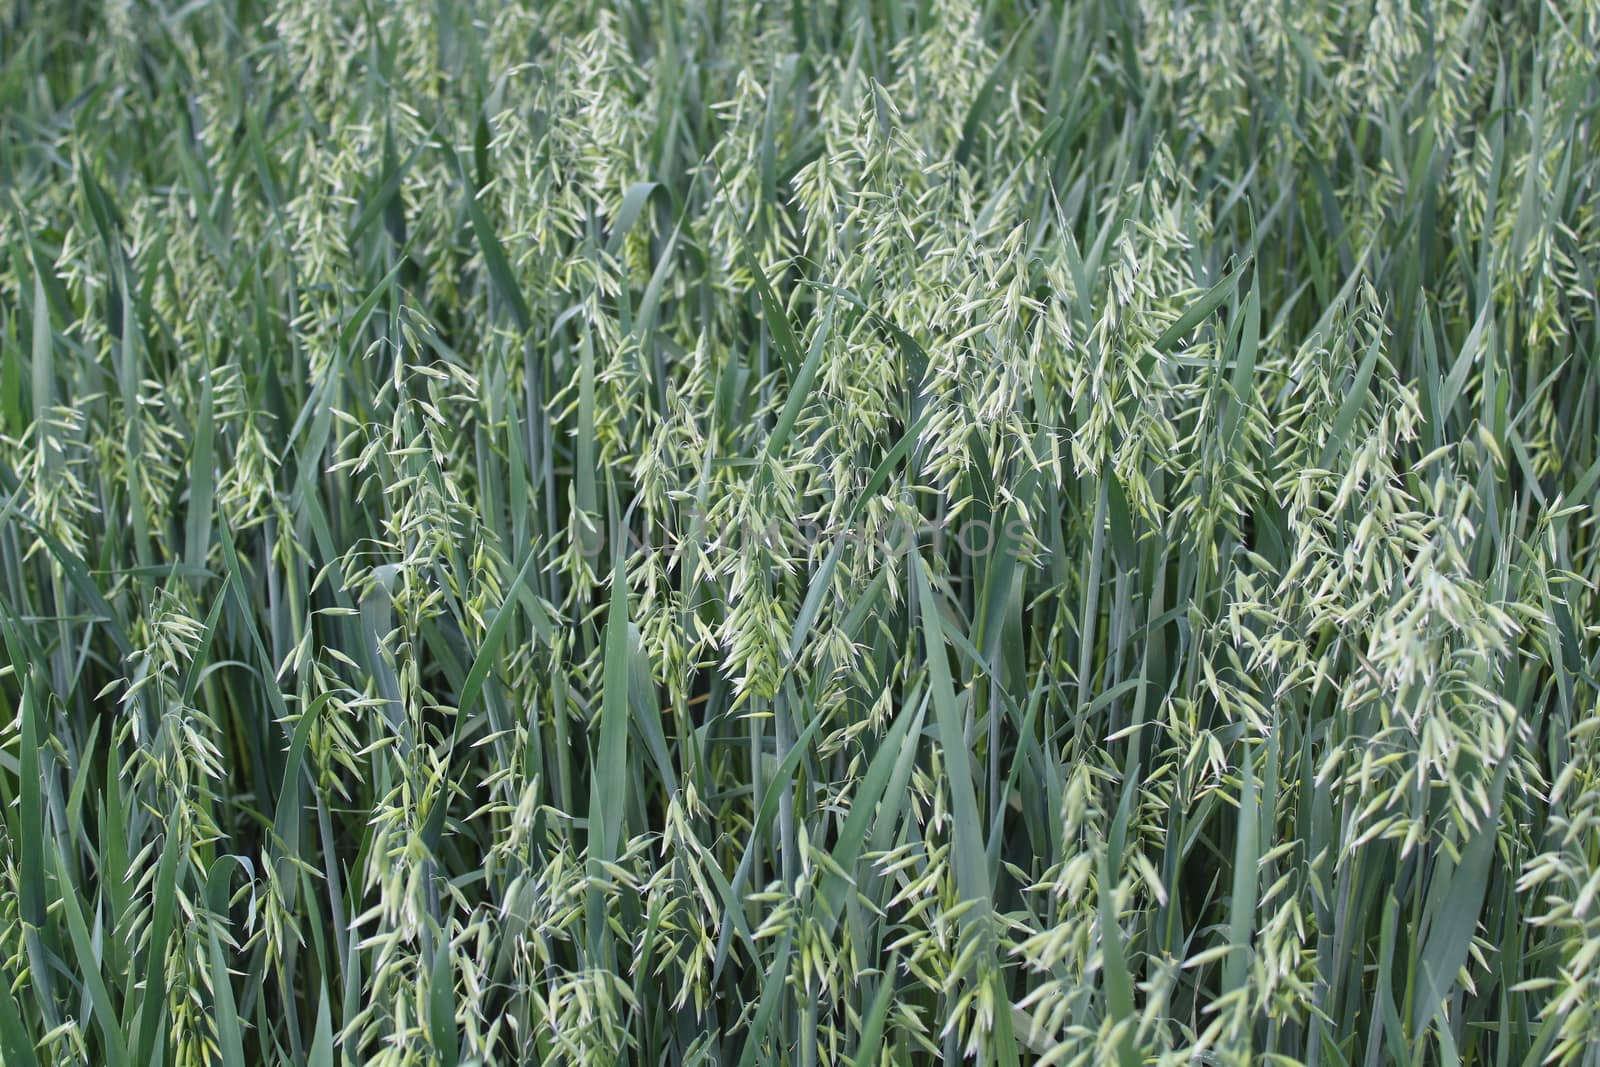 The picture shows a field with unripe oat